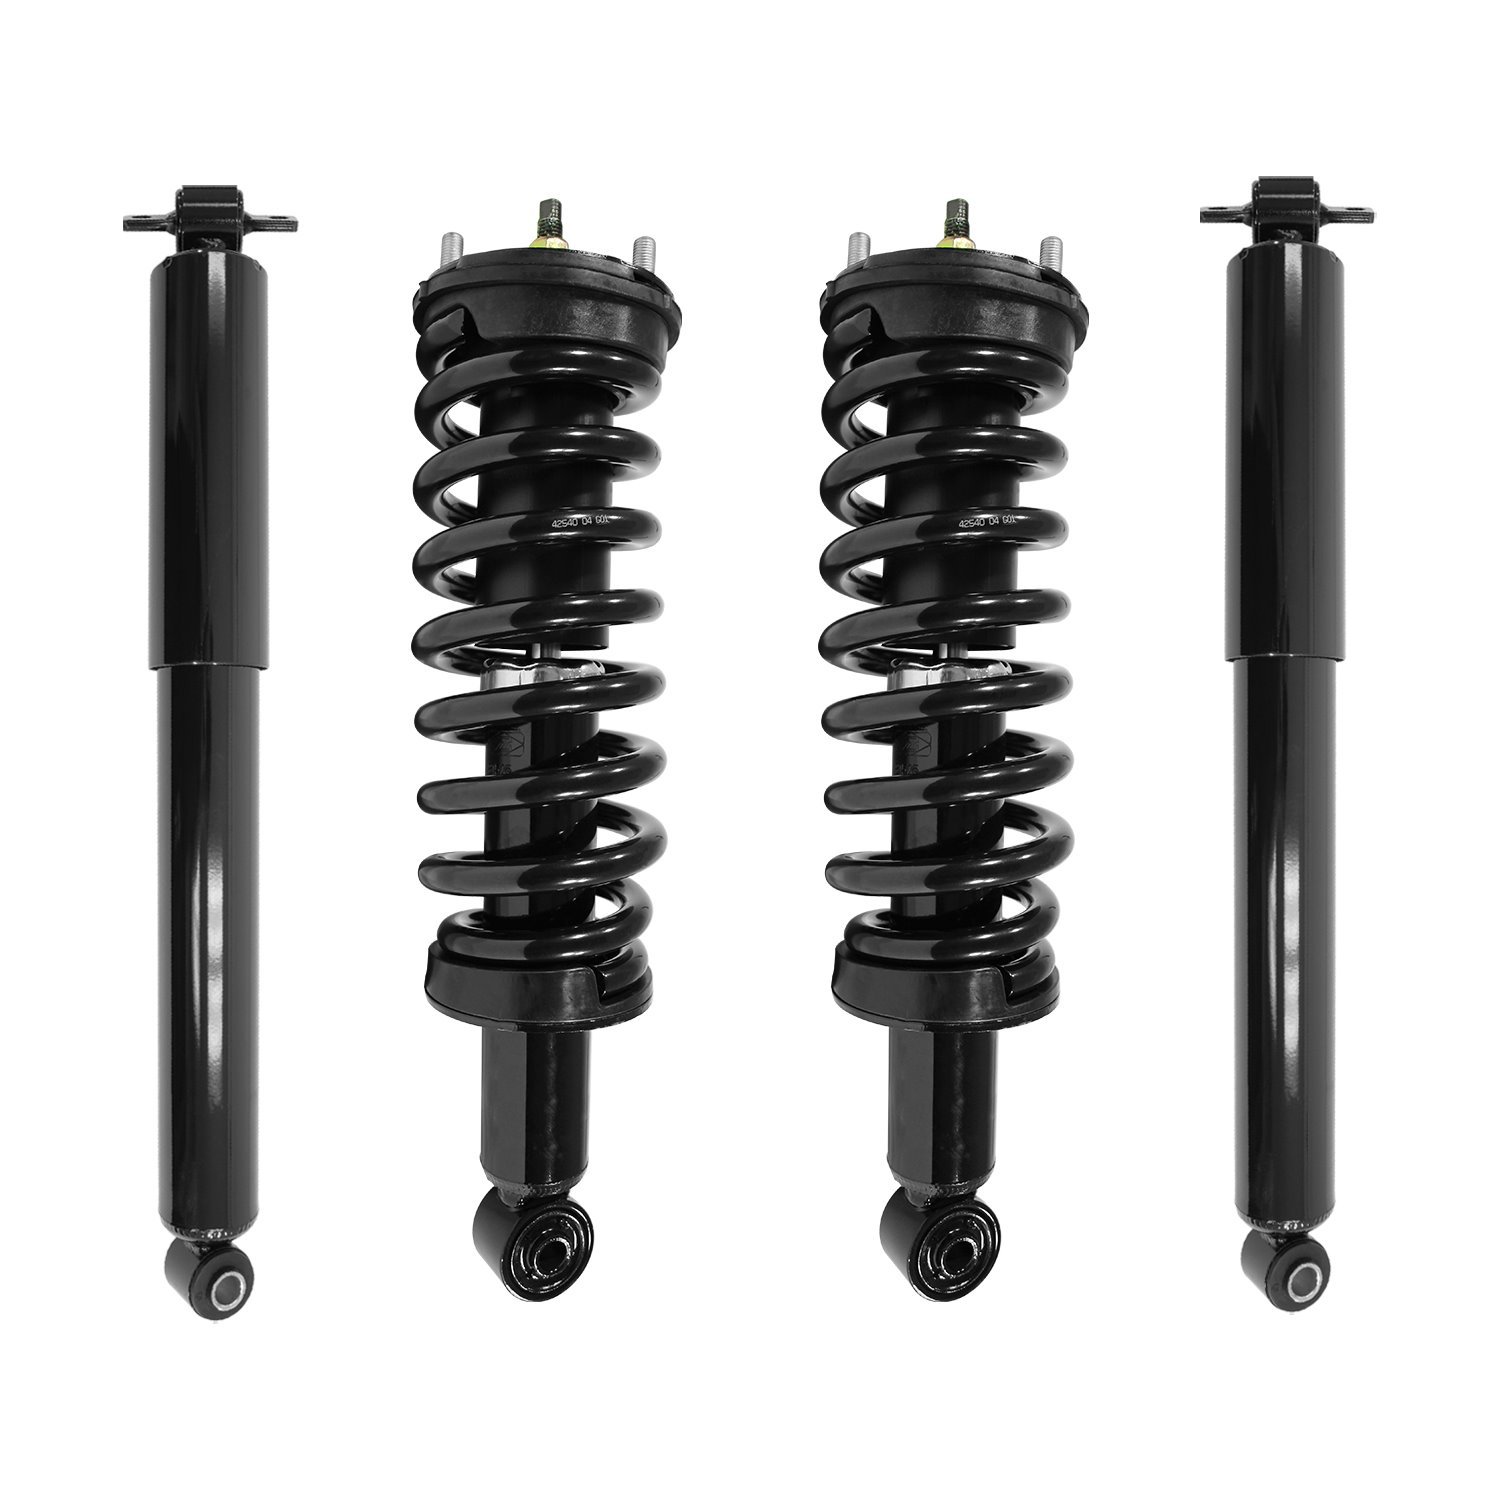 4-11570-251260-001 Front & Rear Suspension Strut & Coil Spring Assembly Fits Select GM